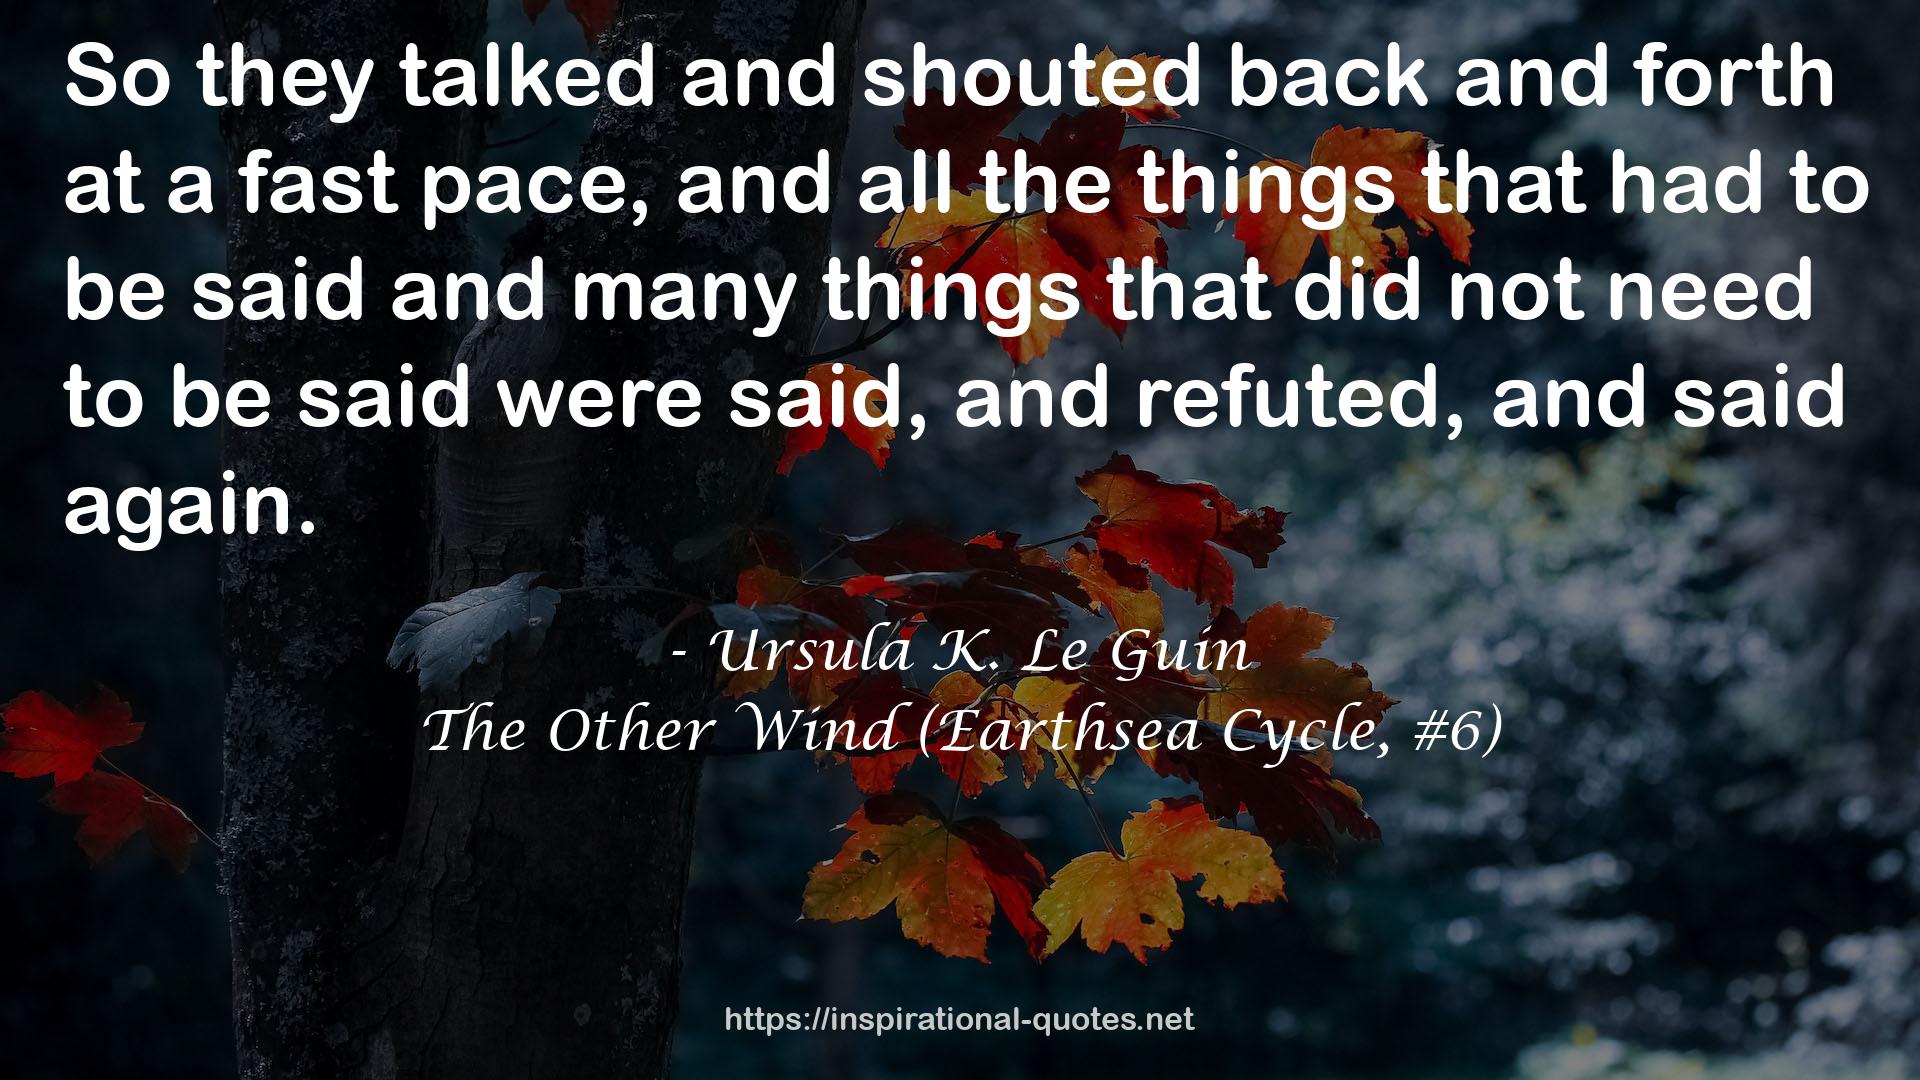 The Other Wind (Earthsea Cycle, #6) QUOTES